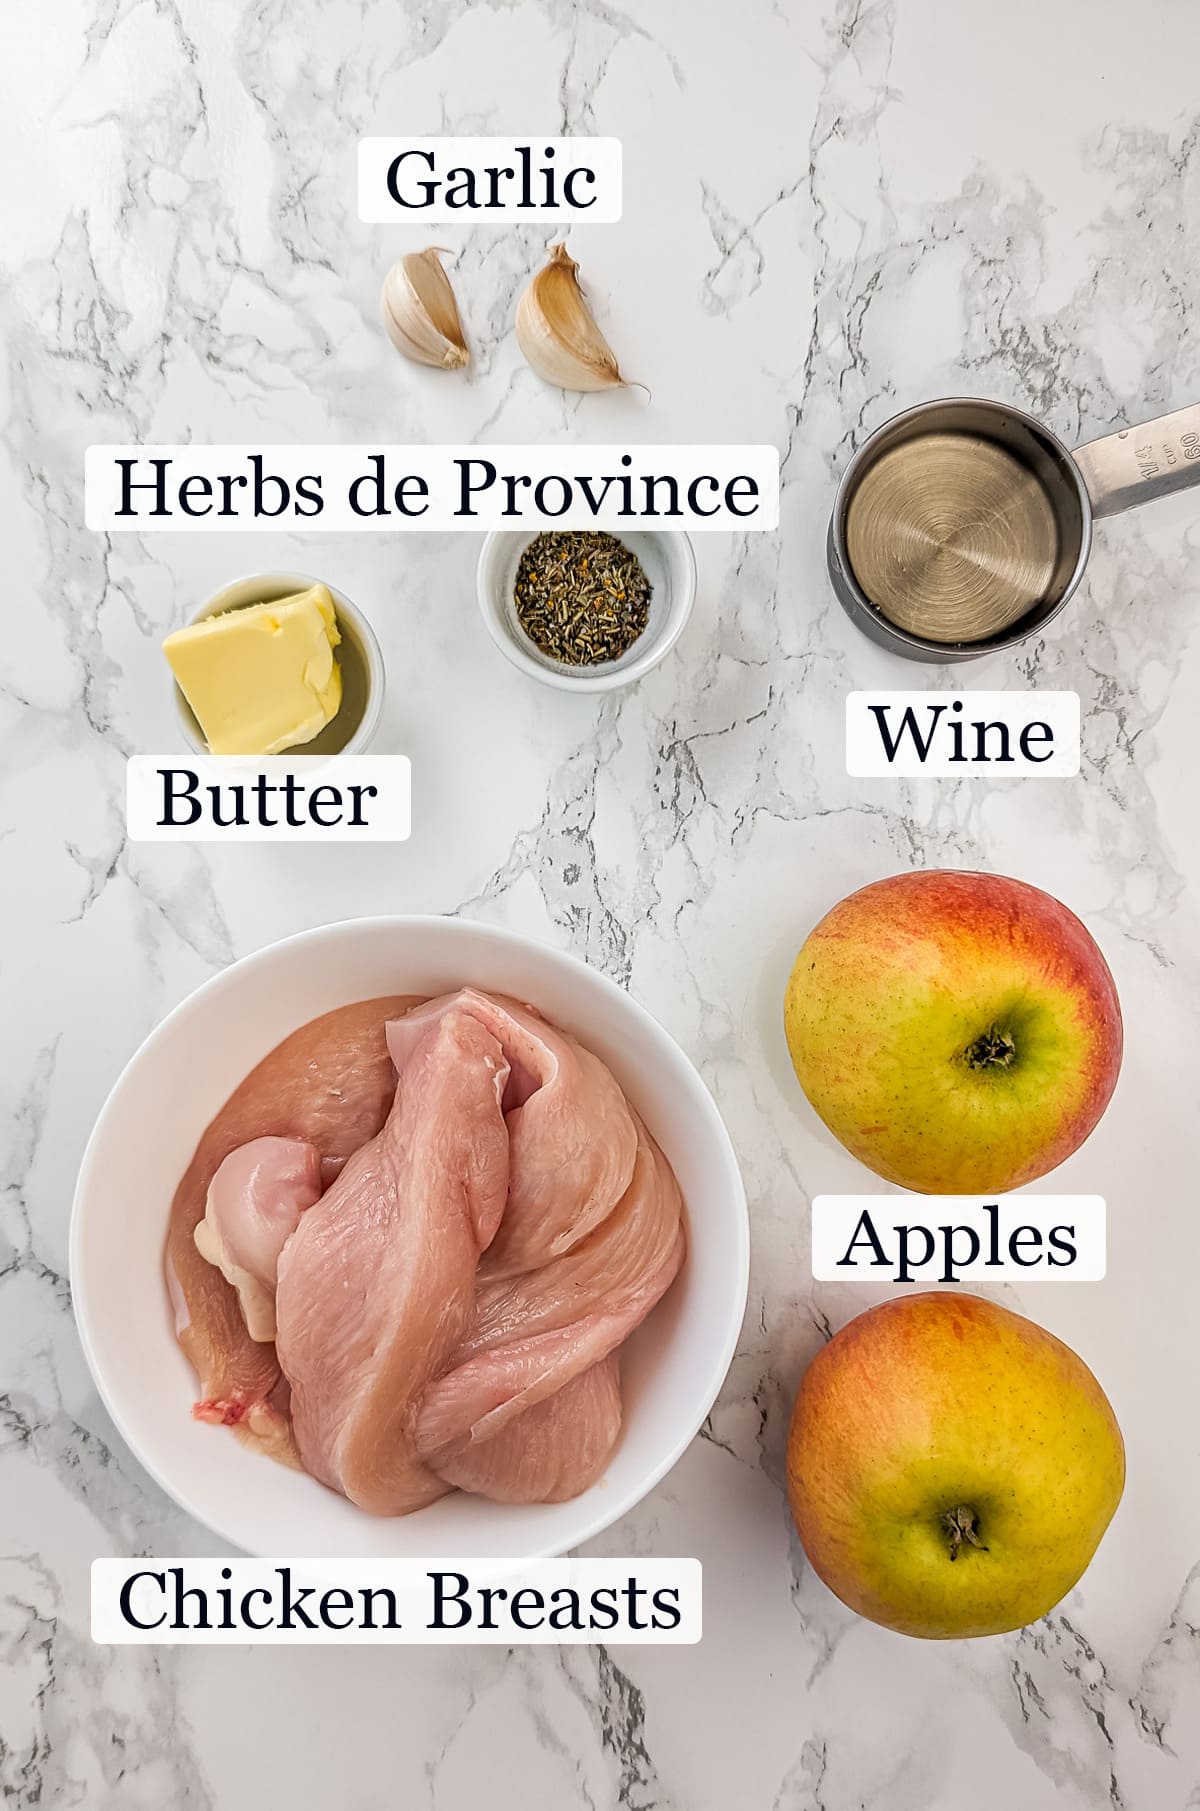 Ingredients for caramelized apple chicken on a marble surface, including raw chicken strips, two whole apples, butter, garlic cloves, herbs, and a measuring cup.